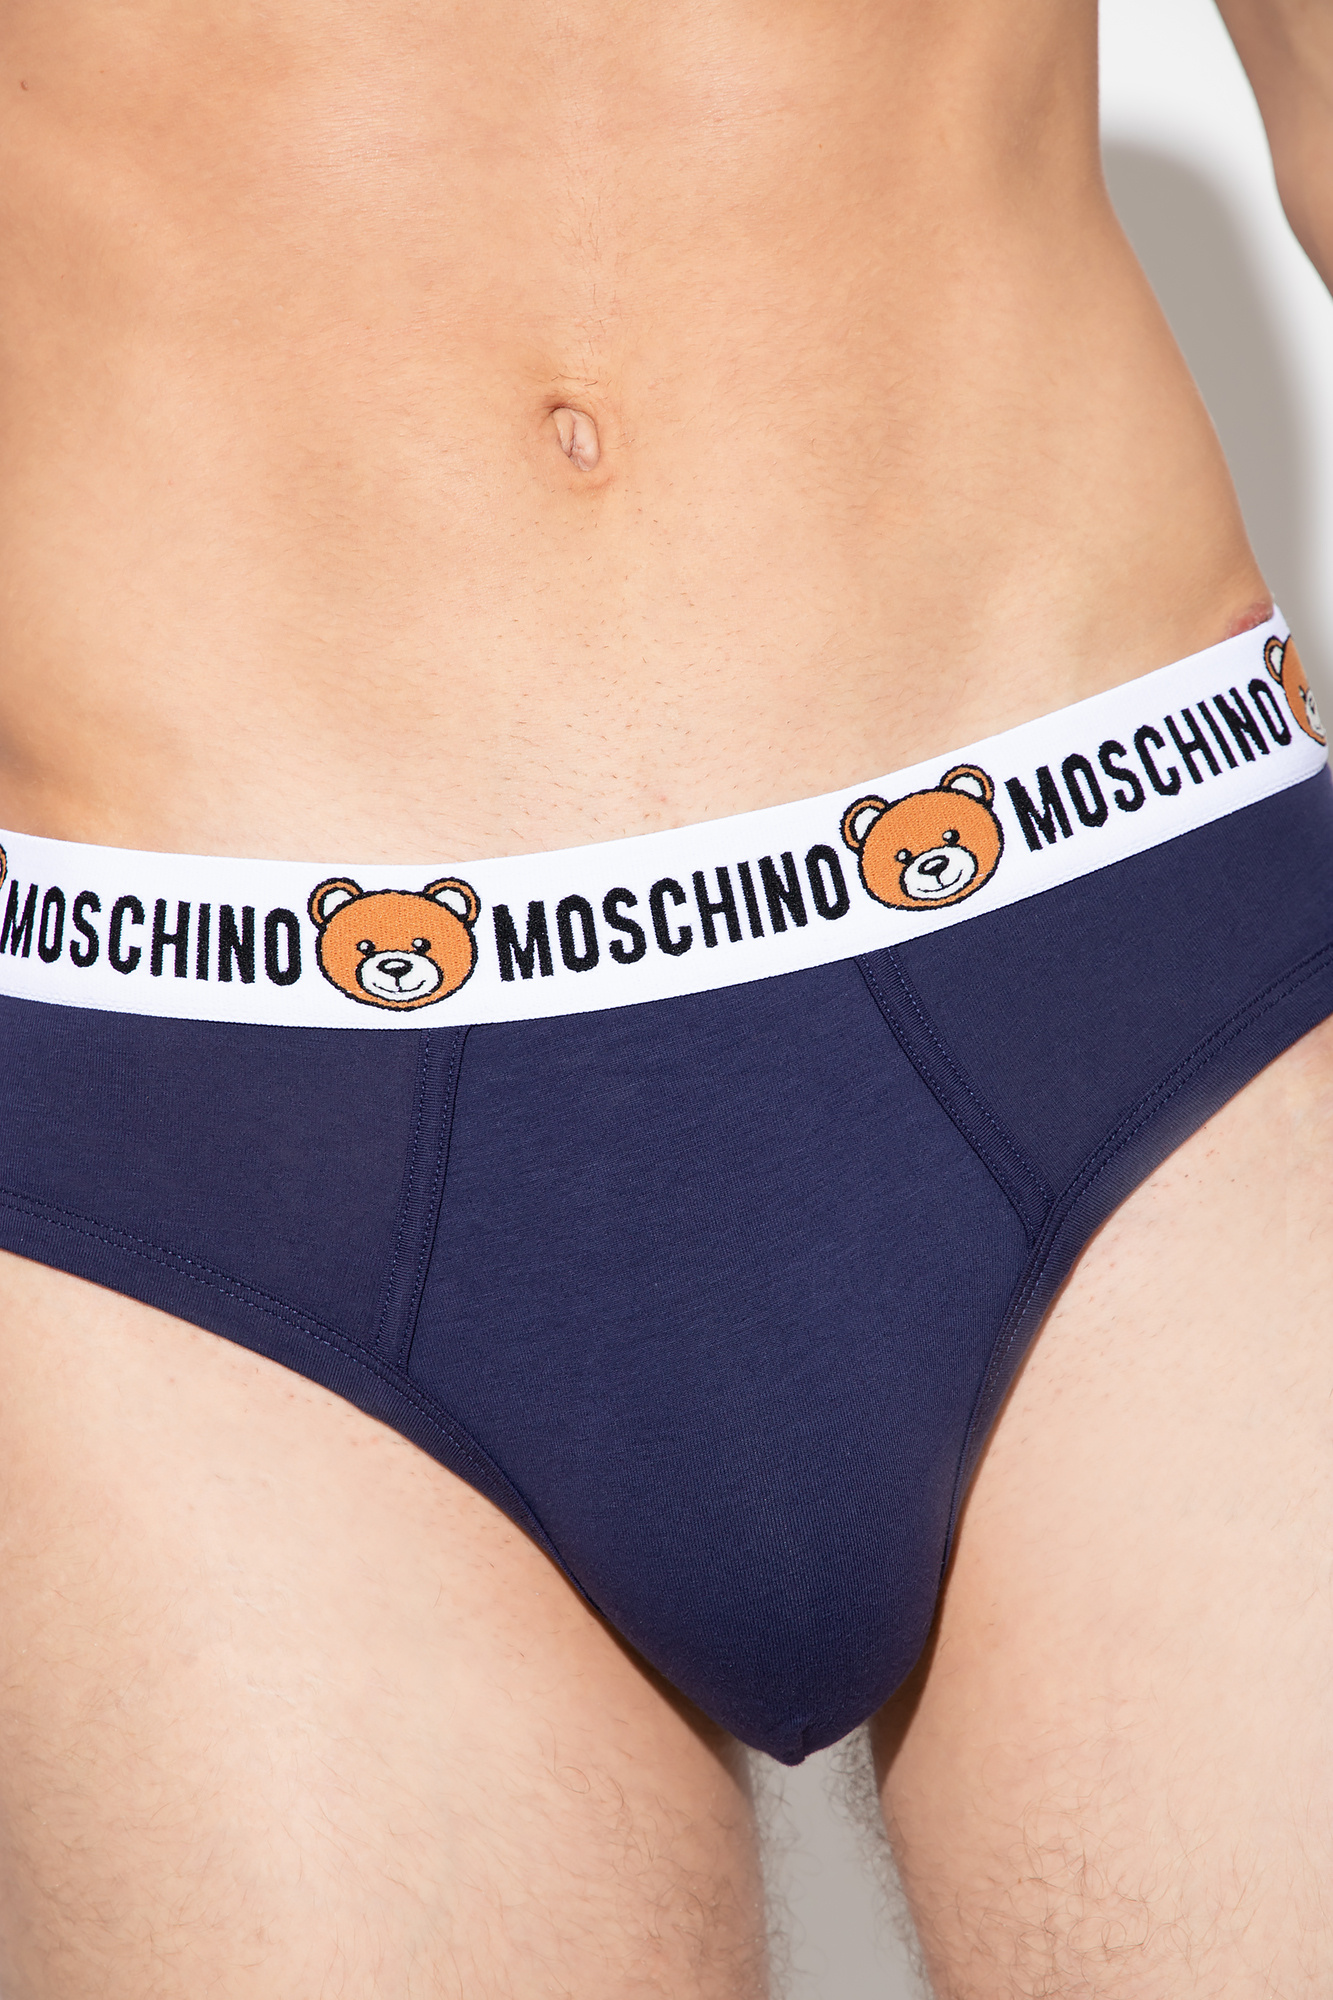 Light blue Branded thong two-pack Moschino - Vitkac France